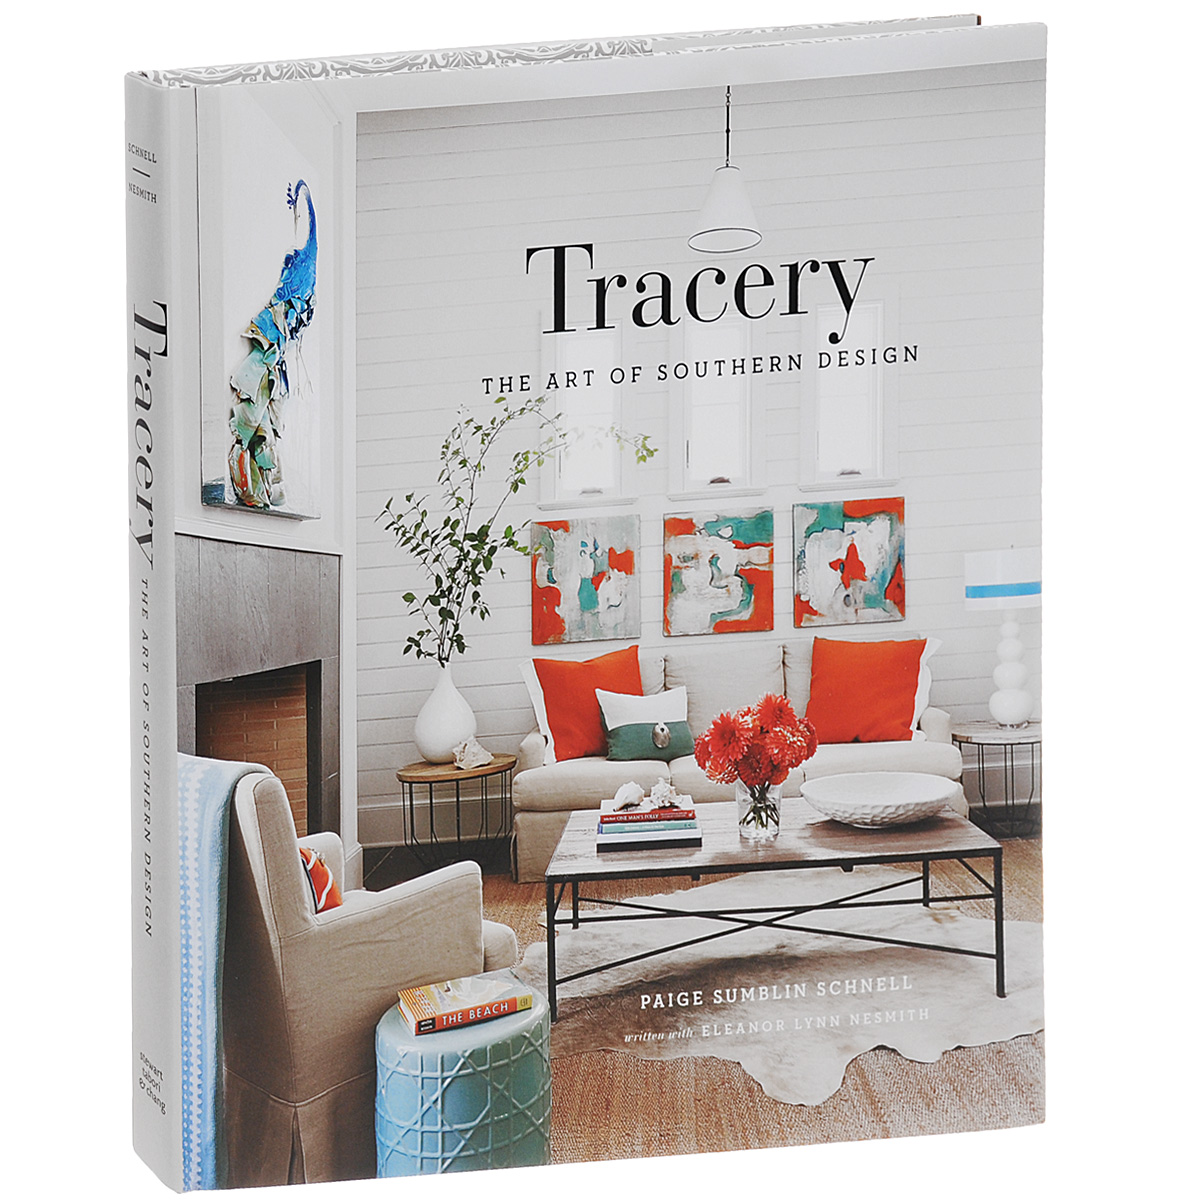 Tracery: The Art of Southern Design